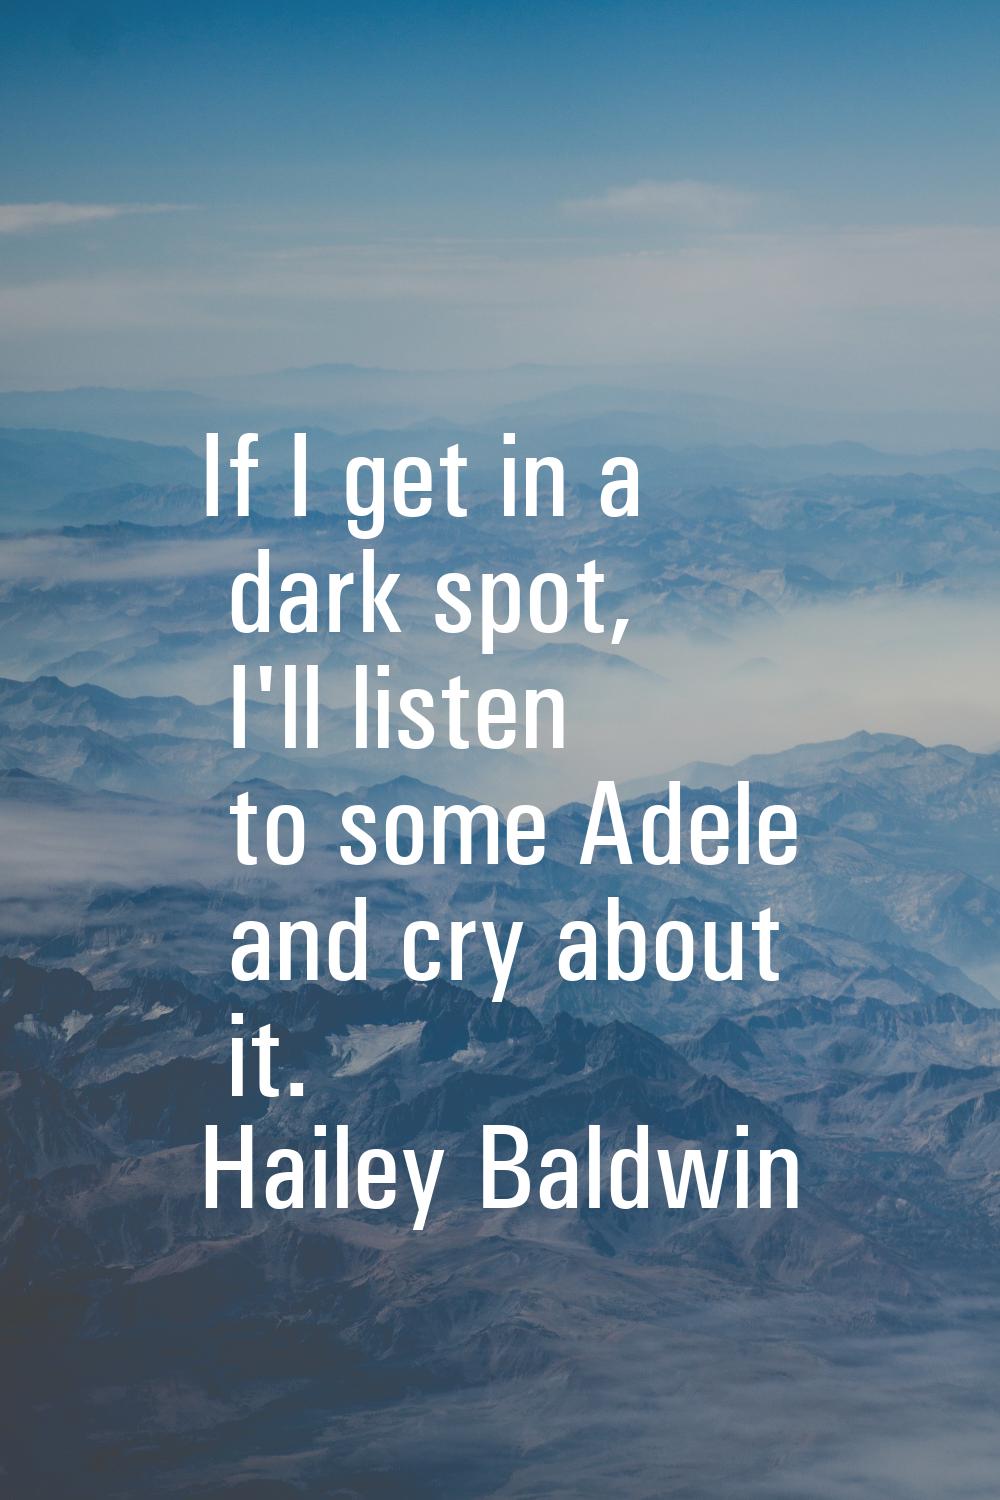 If I get in a dark spot, I'll listen to some Adele and cry about it.